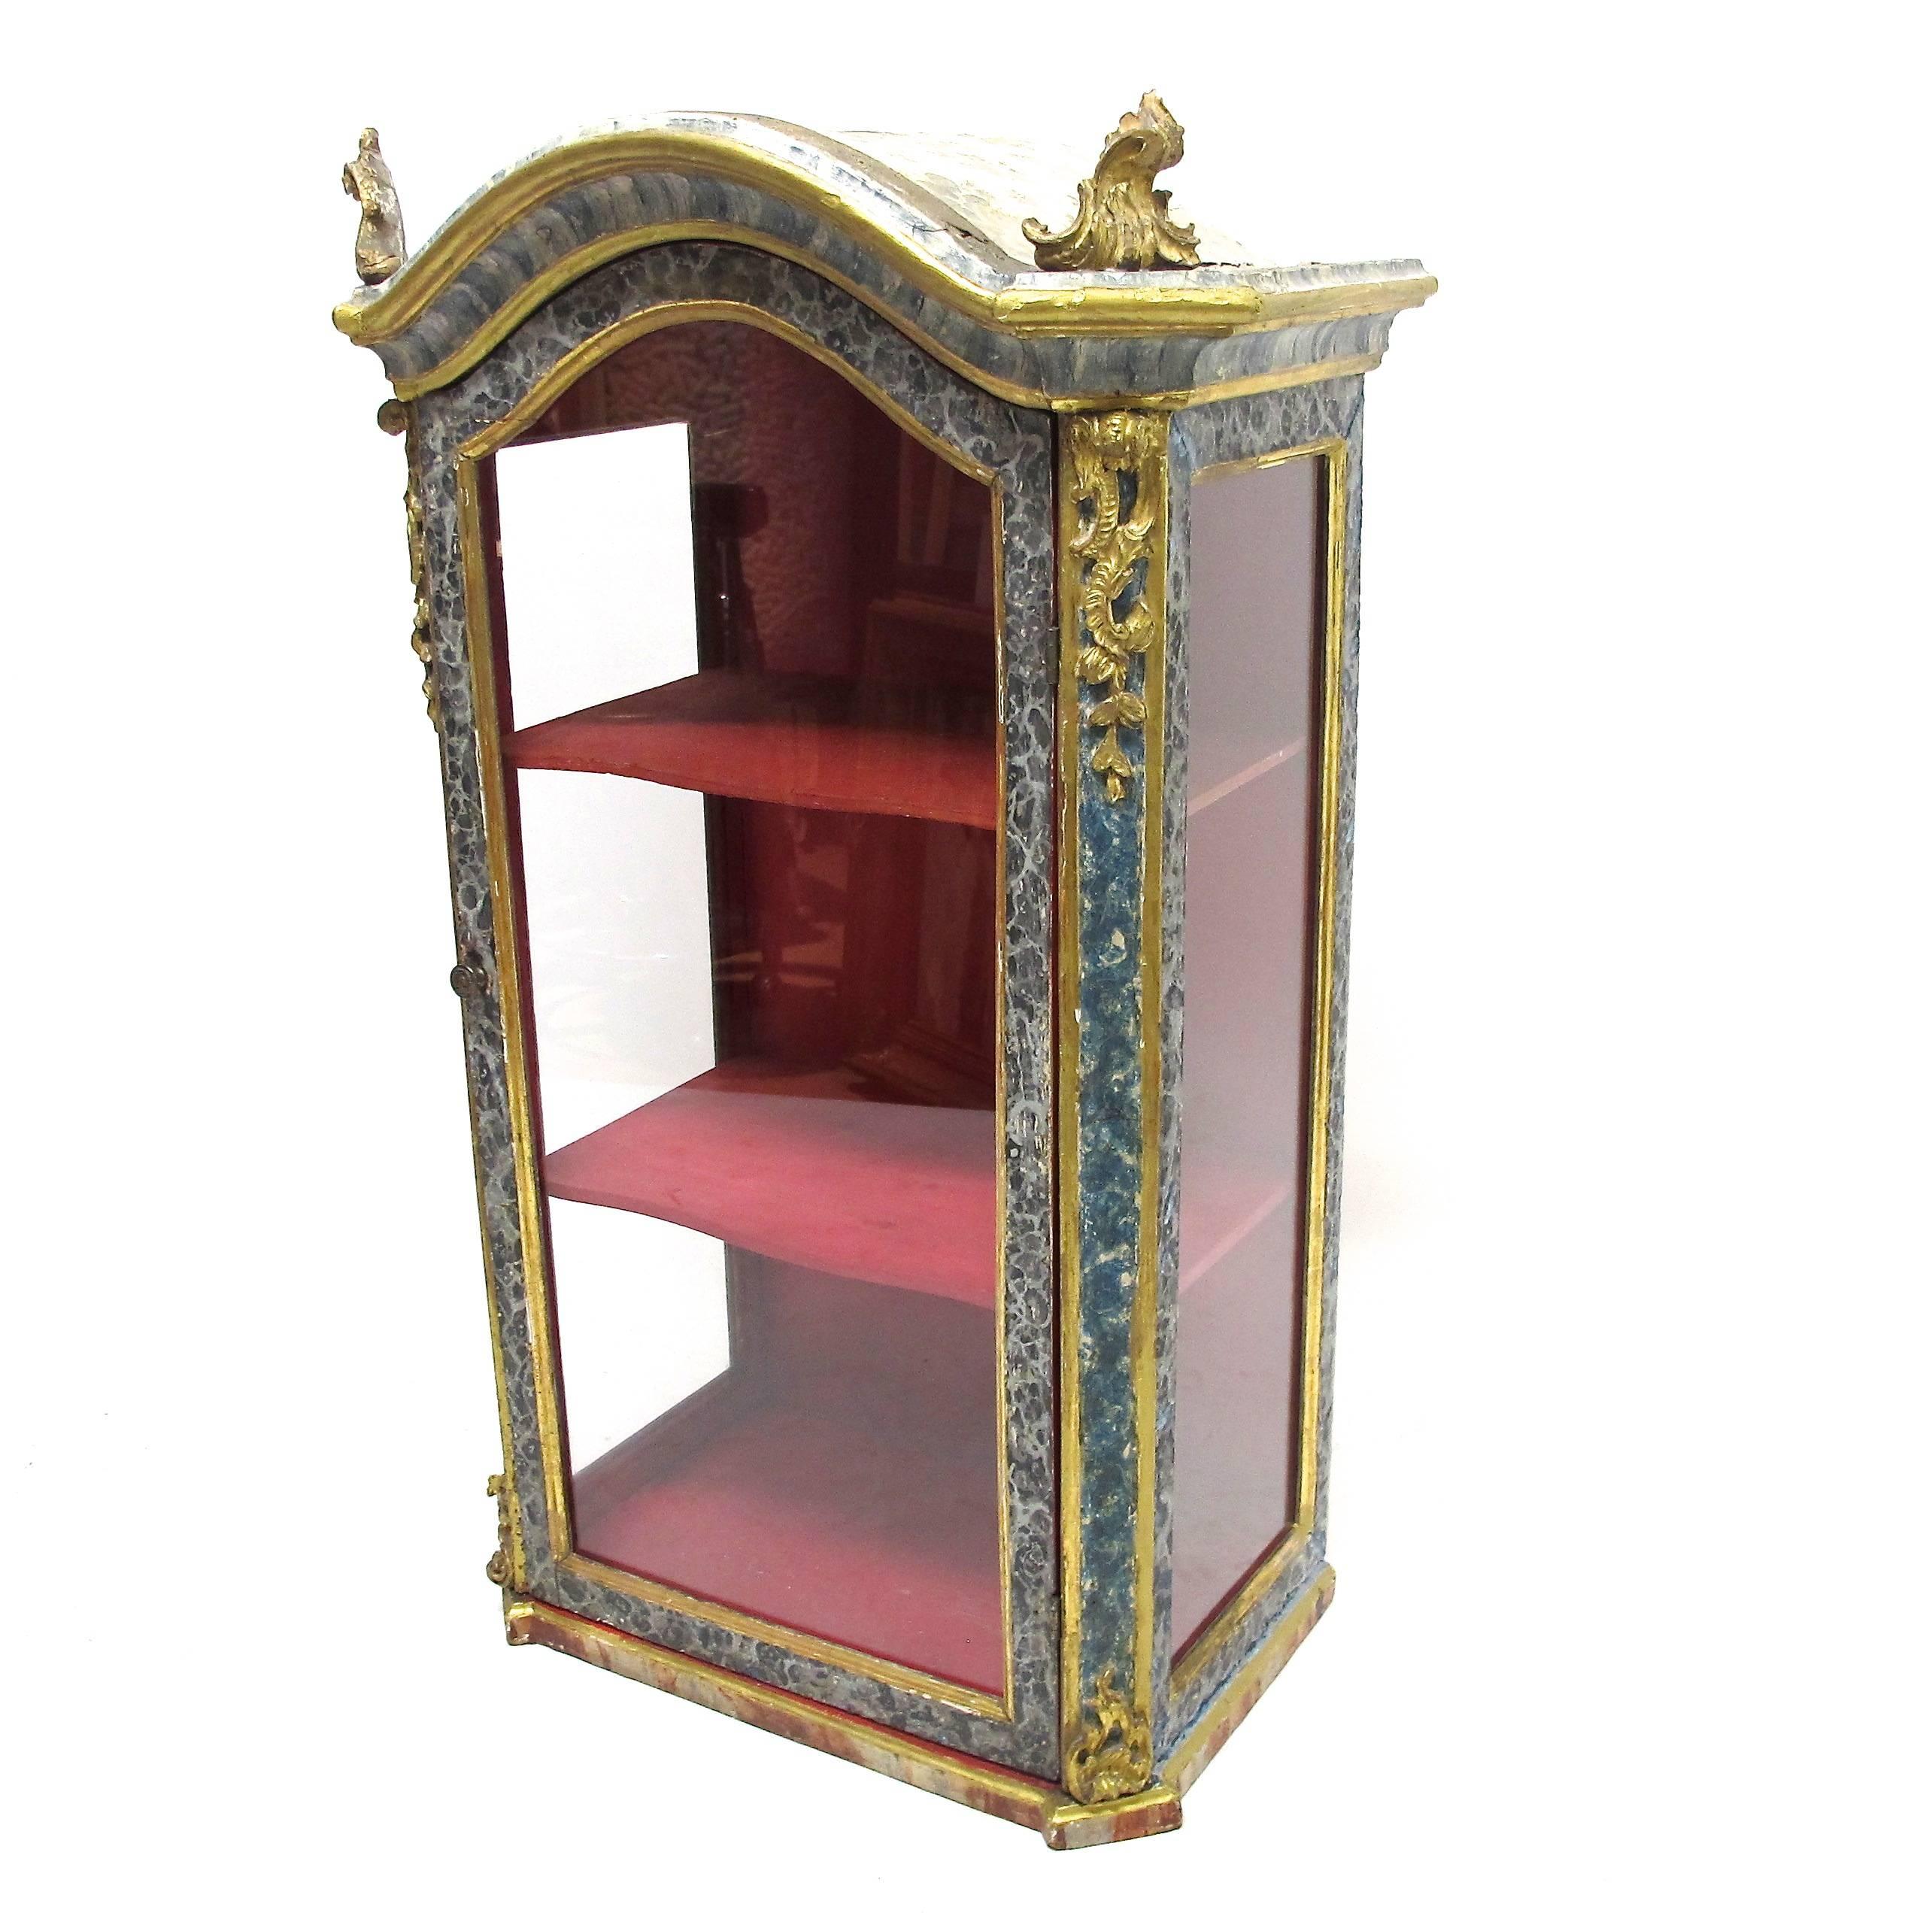 Original faux marble painted cabinet with gilt decoration and giltwood finials. Glass door and sides with two inner shelves. The interior red paint is new and the shelves were added sometime in the mid-20th century. In remarkably good condition,